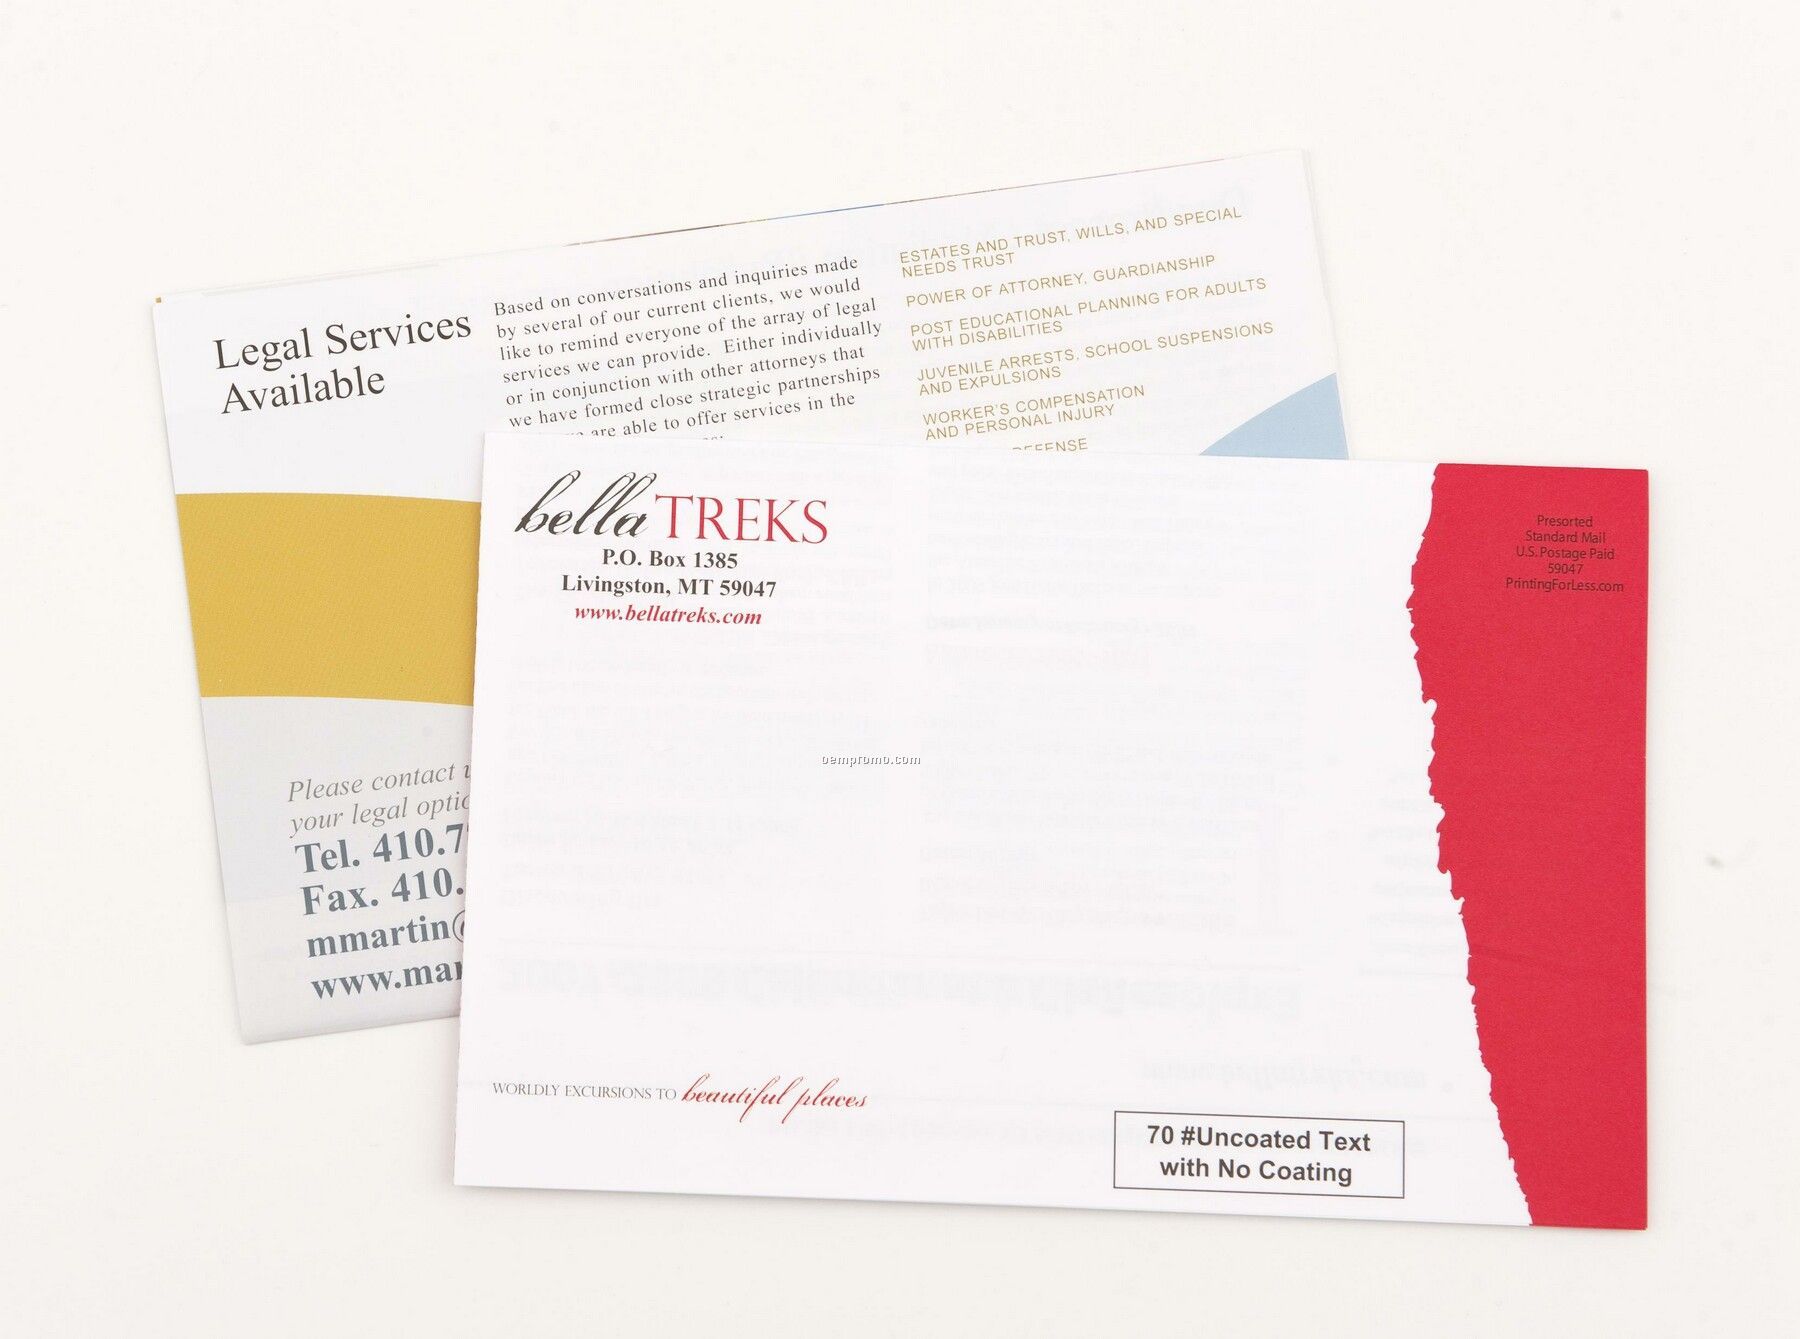 Newsletter - 70 Lb. Uncoated Text/ 8.5"X11" (Full Color)